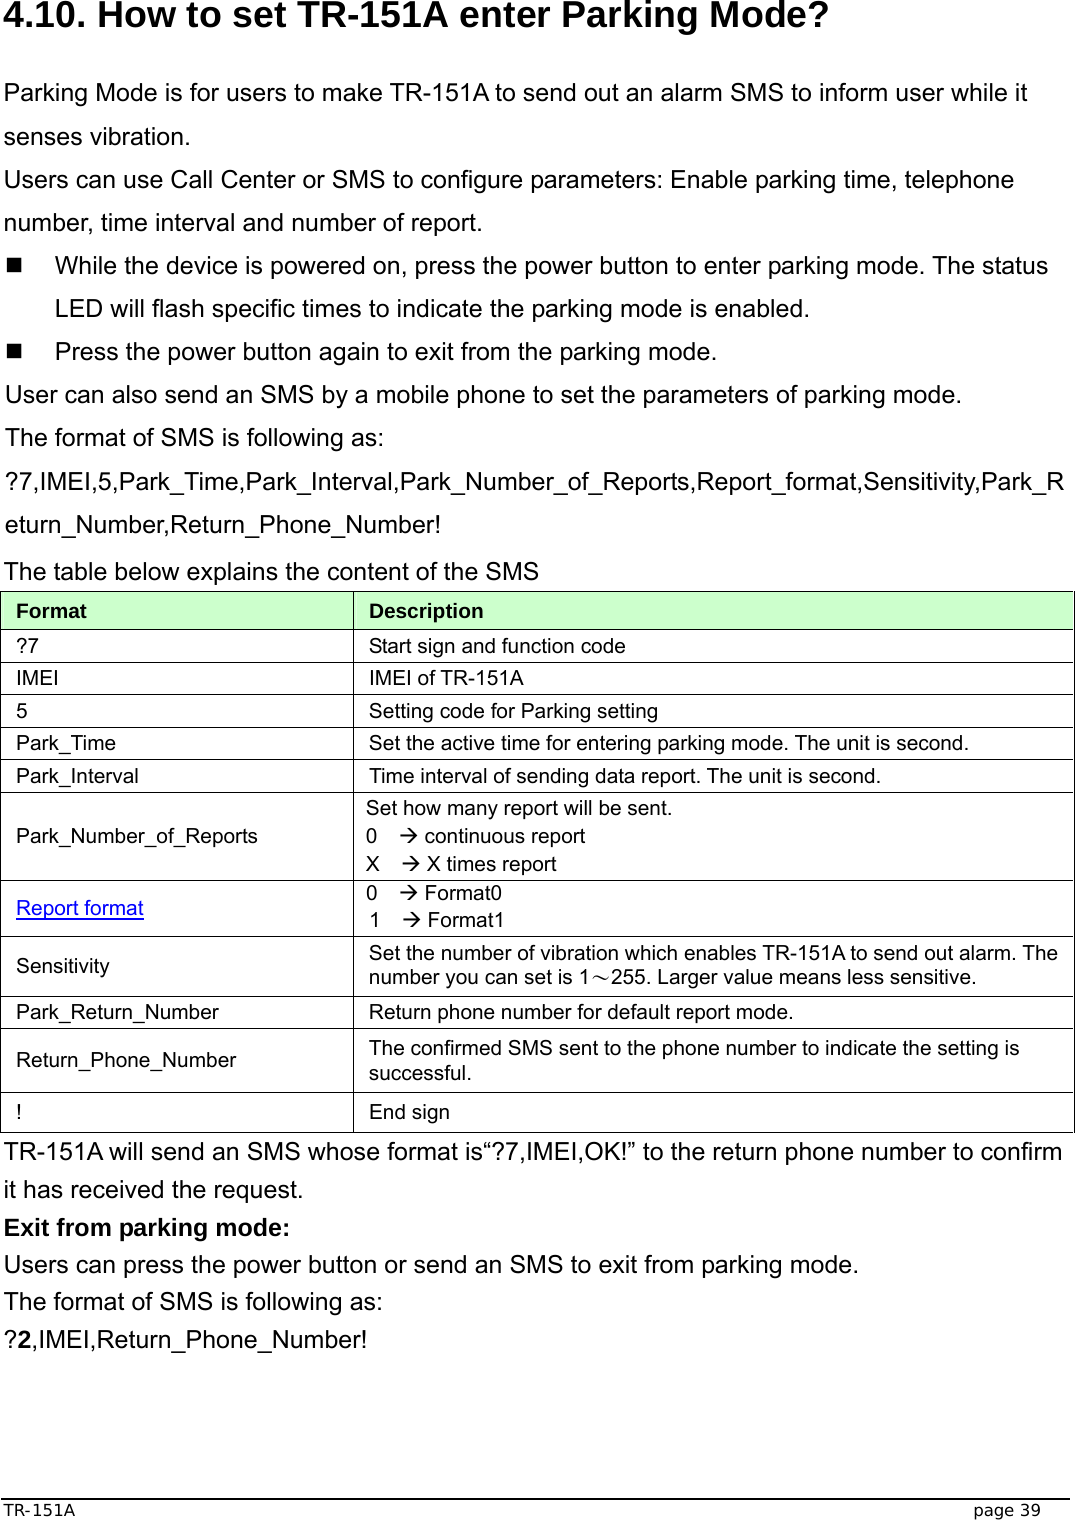  TR-151A   page 39  4.10. How to set TR-151A enter Parking Mode?  Parking Mode is for users to make TR-151A to send out an alarm SMS to inform user while it senses vibration. Users can use Call Center or SMS to configure parameters: Enable parking time, telephone number, time interval and number of report.   While the device is powered on, press the power button to enter parking mode. The status LED will flash specific times to indicate the parking mode is enabled.   Press the power button again to exit from the parking mode.   User can also send an SMS by a mobile phone to set the parameters of parking mode. The format of SMS is following as: ?7,IMEI,5,Park_Time,Park_Interval,Park_Number_of_Reports,Report_format,Sensitivity,Park_Return_Number,Return_Phone_Number! The table below explains the content of the SMS Format  Description ?7  Start sign and function code IMEI IMEI of TR-151A 5  Setting code for Parking setting Park_Time  Set the active time for entering parking mode. The unit is second. Park_Interval  Time interval of sending data report. The unit is second. Park_Number_of_Reports Set how many report will be sent. 0  Æ continuous report X  Æ X times report Report format 0  Æ Format0 1  Æ Format1 Sensitivity  Set the number of vibration which enables TR-151A to send out alarm. The number you can set is 1～255. Larger value means less sensitive. Park_Return_Number  Return phone number for default report mode. Return_Phone_Number  The confirmed SMS sent to the phone number to indicate the setting is successful. ! End sign TR-151A will send an SMS whose format is“?7,IMEI,OK!” to the return phone number to confirm it has received the request.   Exit from parking mode: Users can press the power button or send an SMS to exit from parking mode. The format of SMS is following as: ?2,IMEI,Return_Phone_Number!   